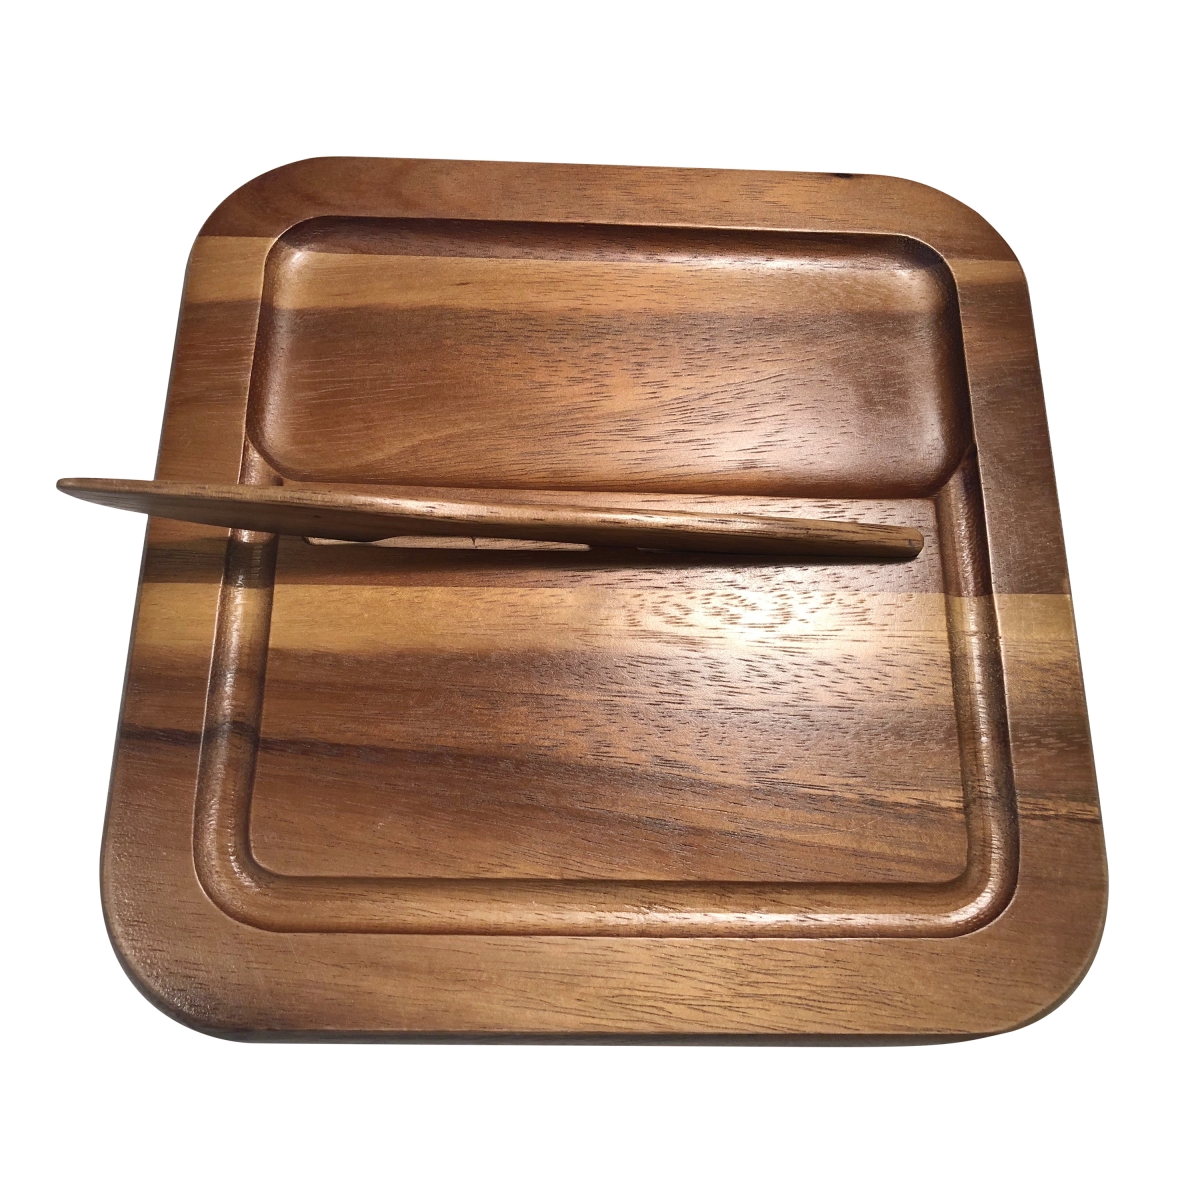 436 Cheeseboard With Knife - 9 X 9 X .75 In.